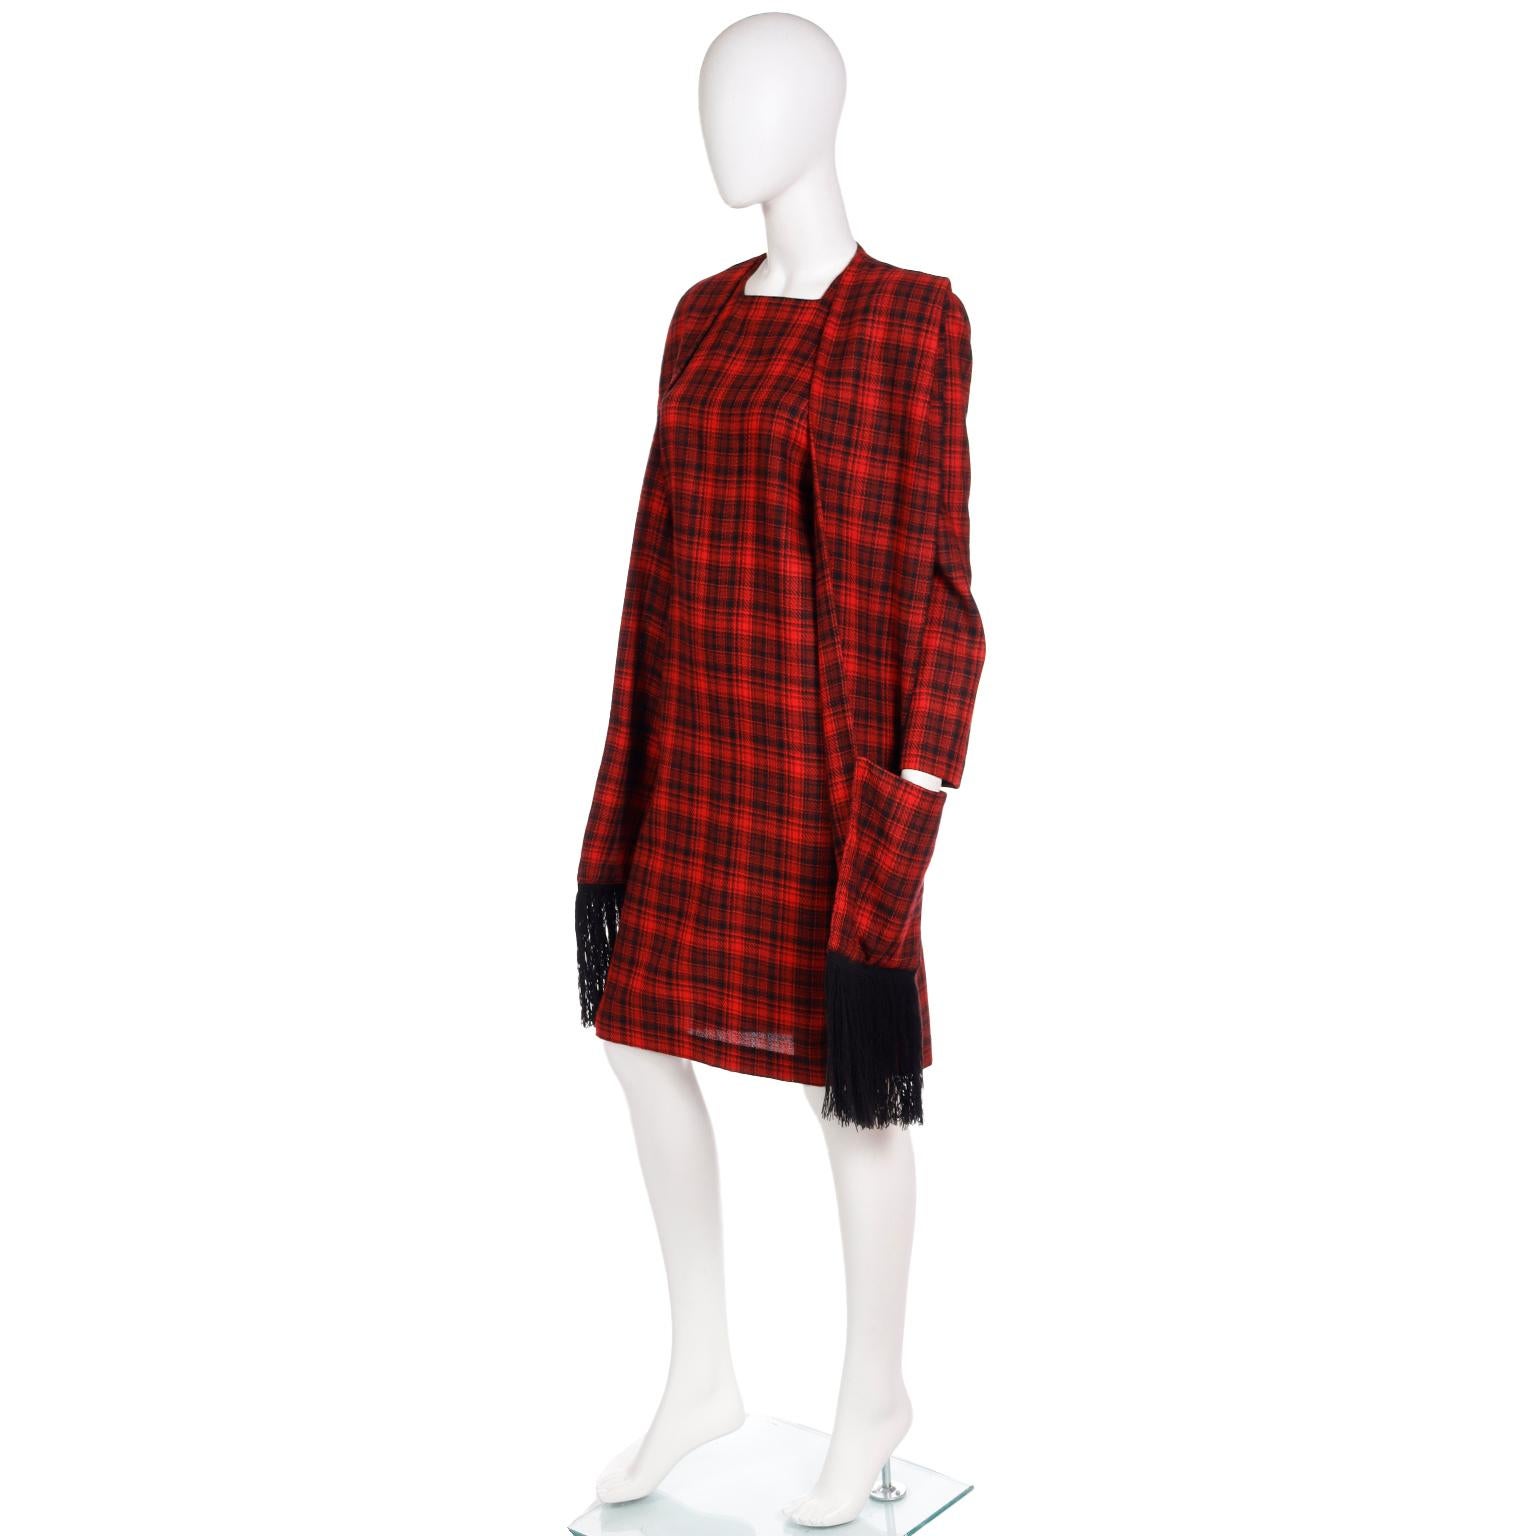 Pierre Cardin Vintage Red Plaid Dress With Long Scarf w Fringe & Pockets In Good Condition For Sale In Portland, OR